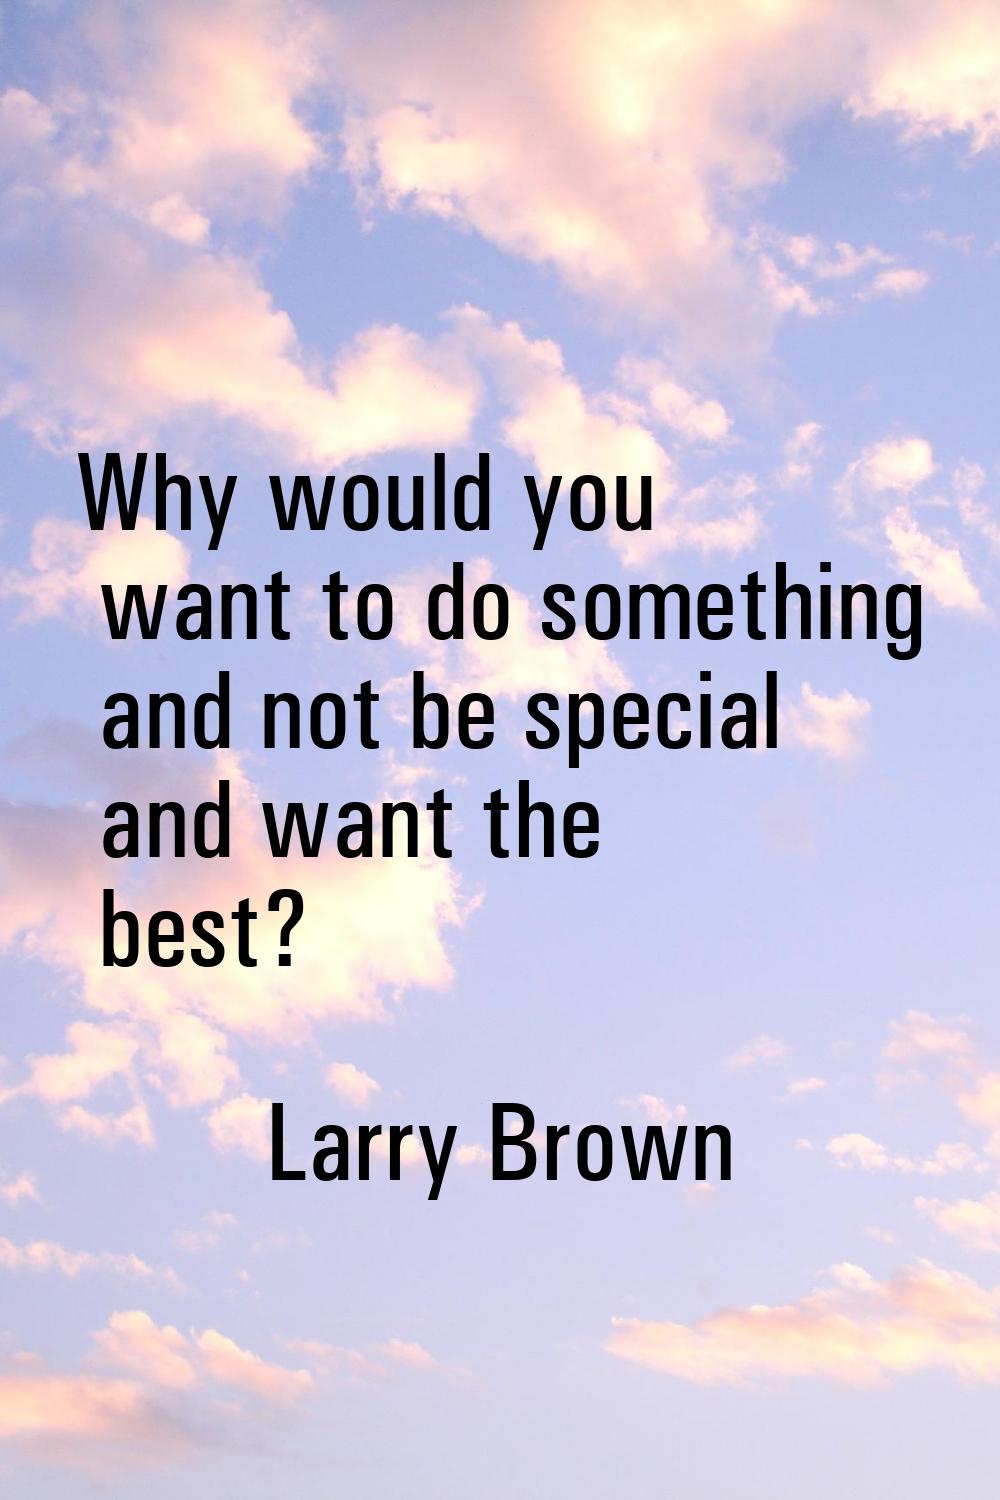 Why would you want to do something and not be special and want the best?